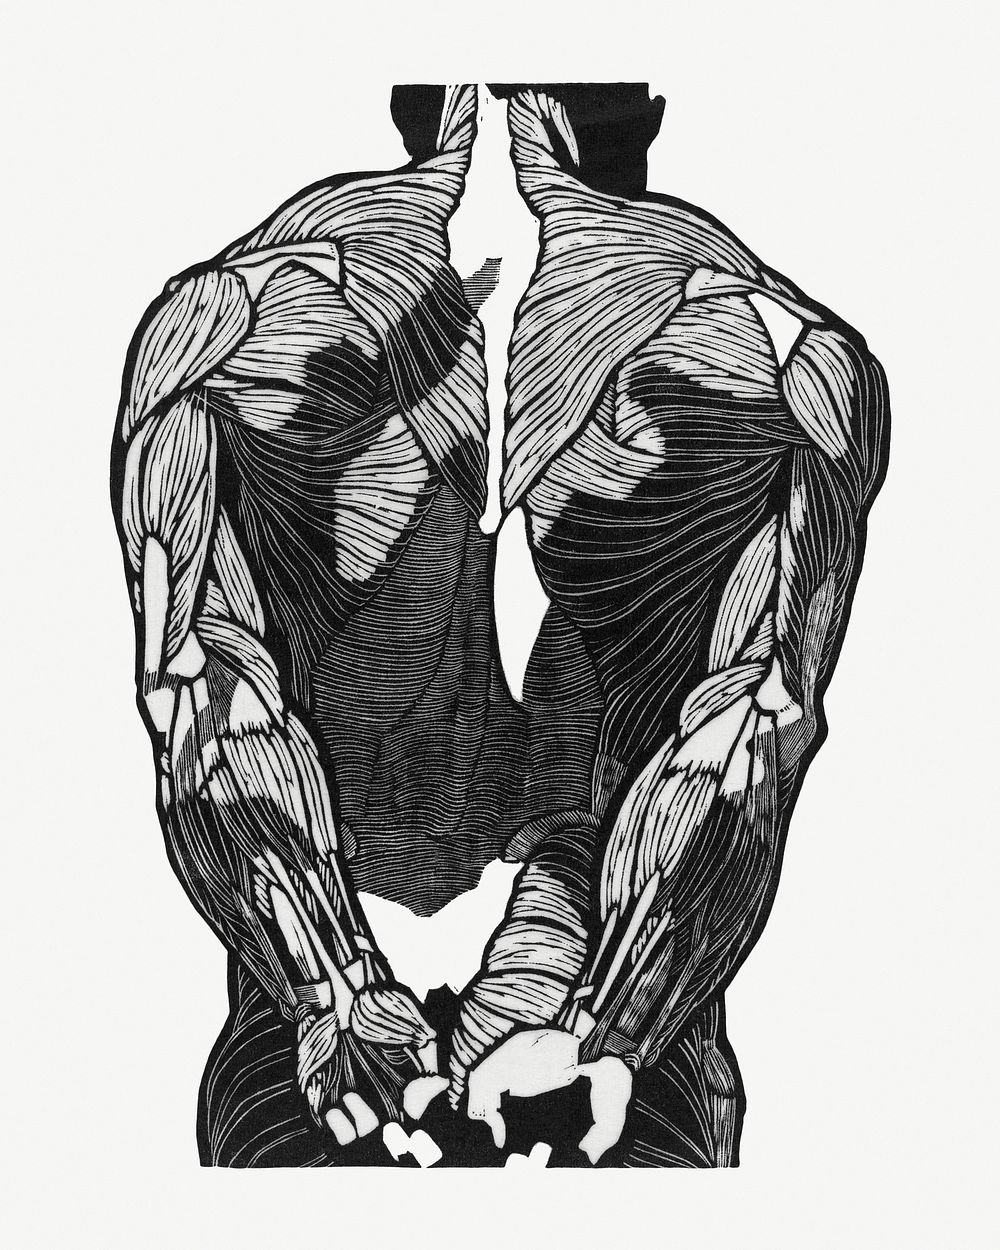 Man&rsquo;s back muscles psd human anatomy print, remixed from artworks by Reijer Stol